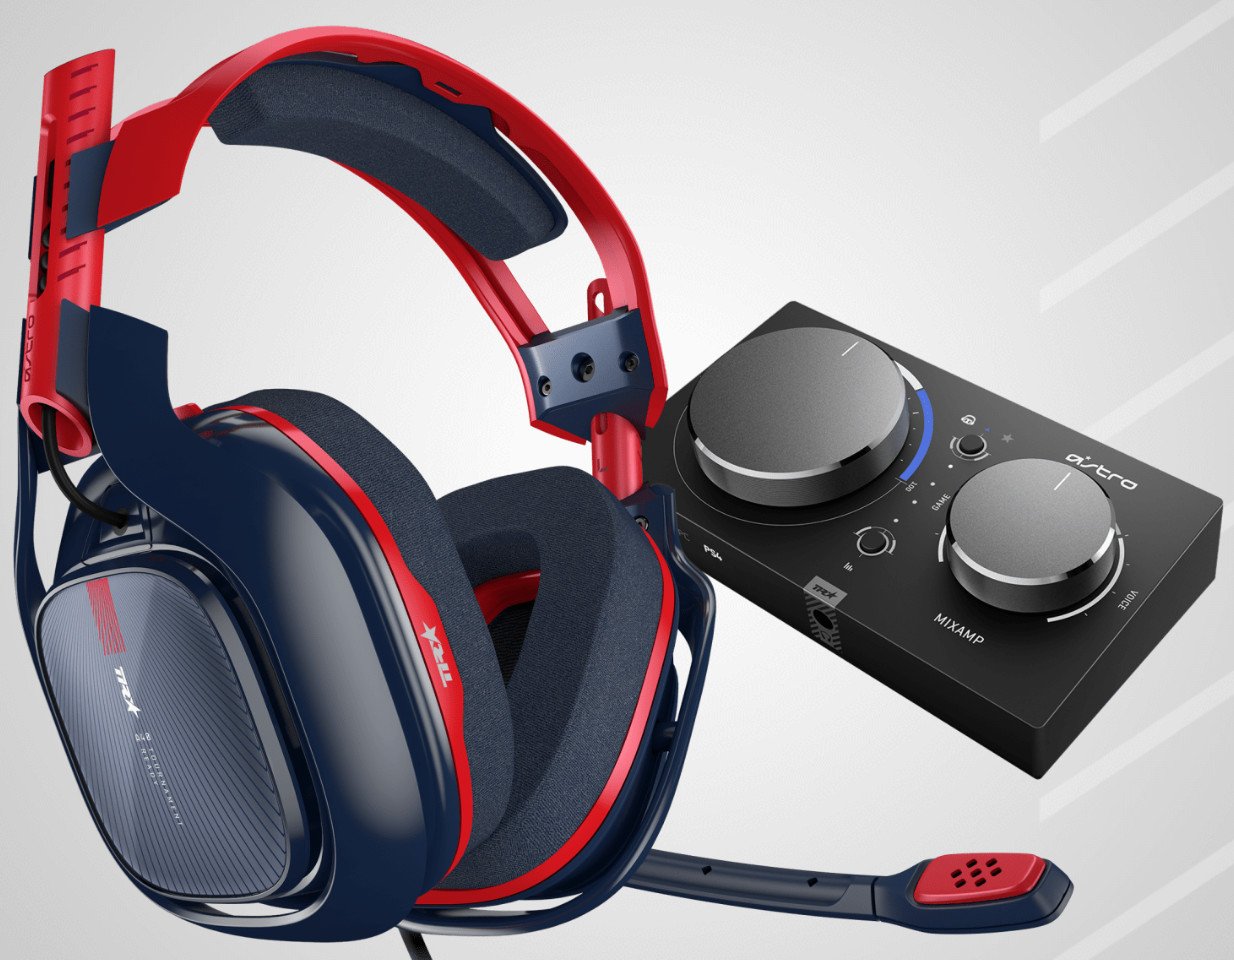 The Astro A40 TR with the Mixamp